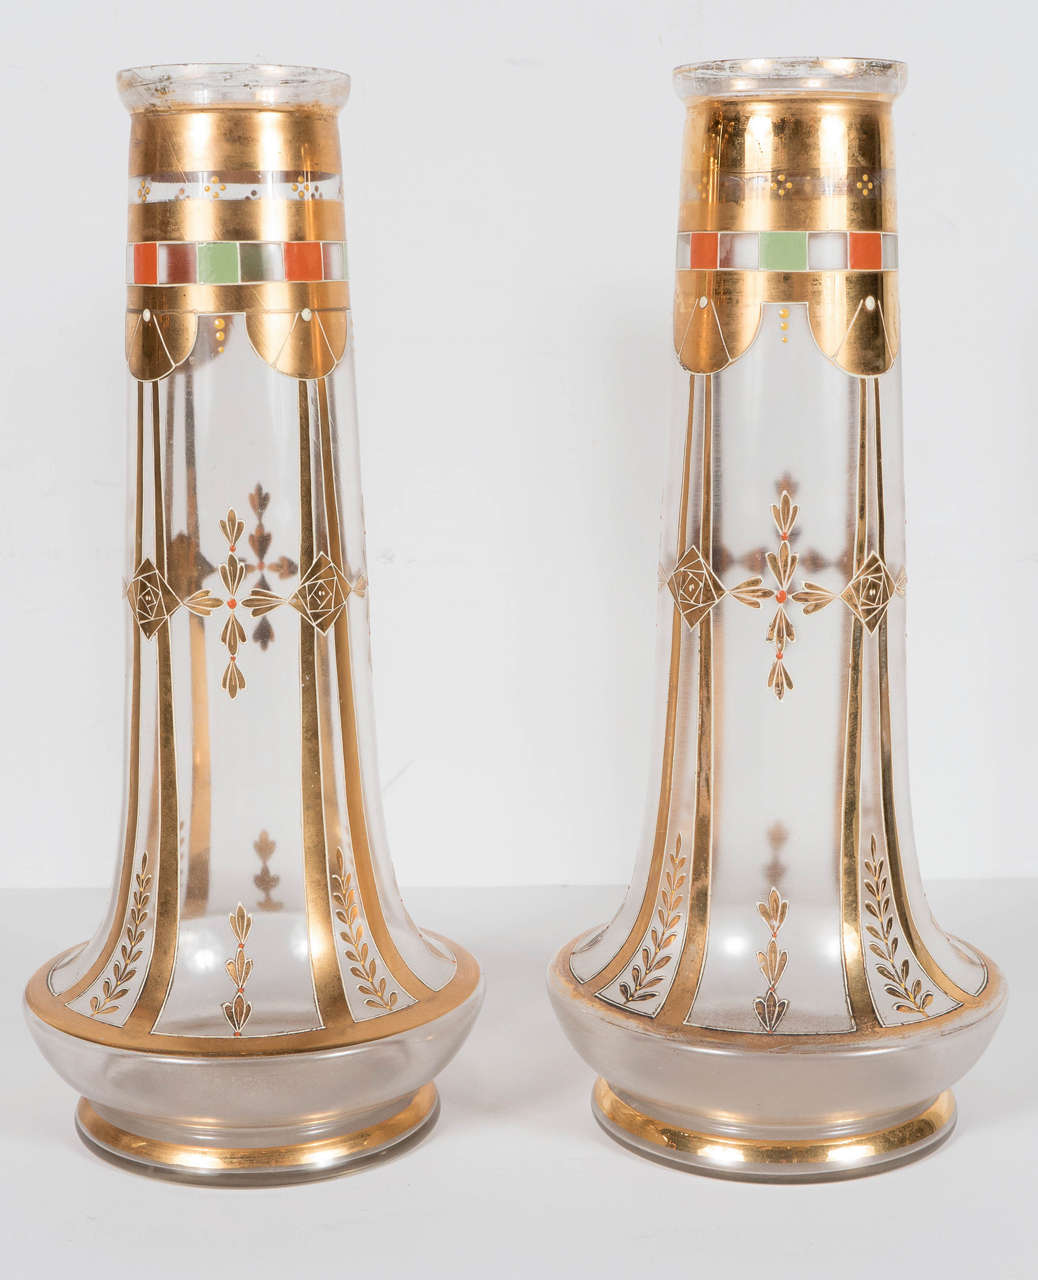 These gorgeous vases feature an elongated 1920s style design with 24-karat gilded embellishments, as well as geometric and floral motifs. There is also some colored enamel detailing, in shades of coral and celadon, under the lip of the vase as well